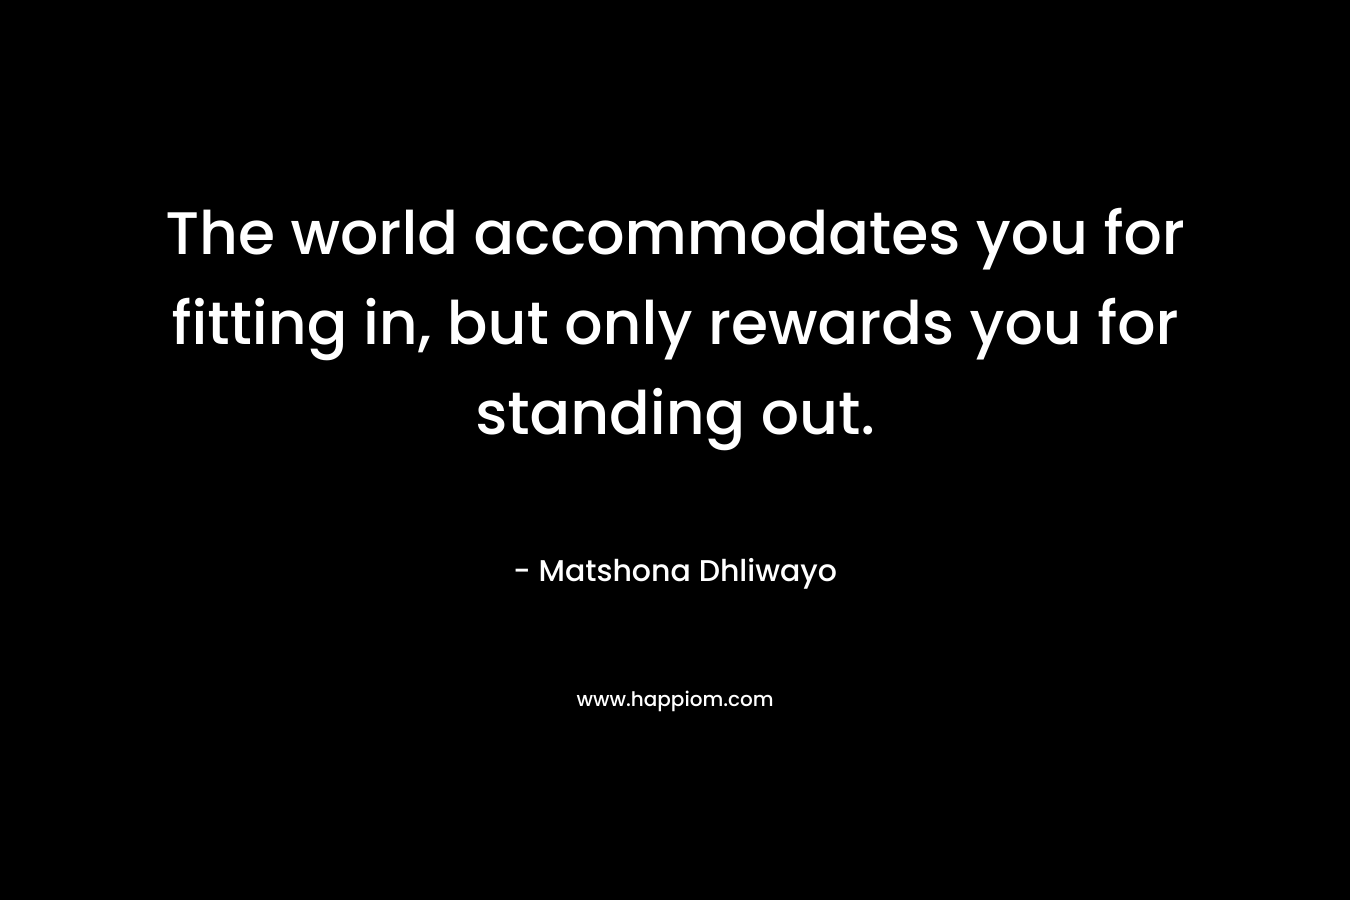 The world accommodates you for fitting in, but only rewards you for standing out.